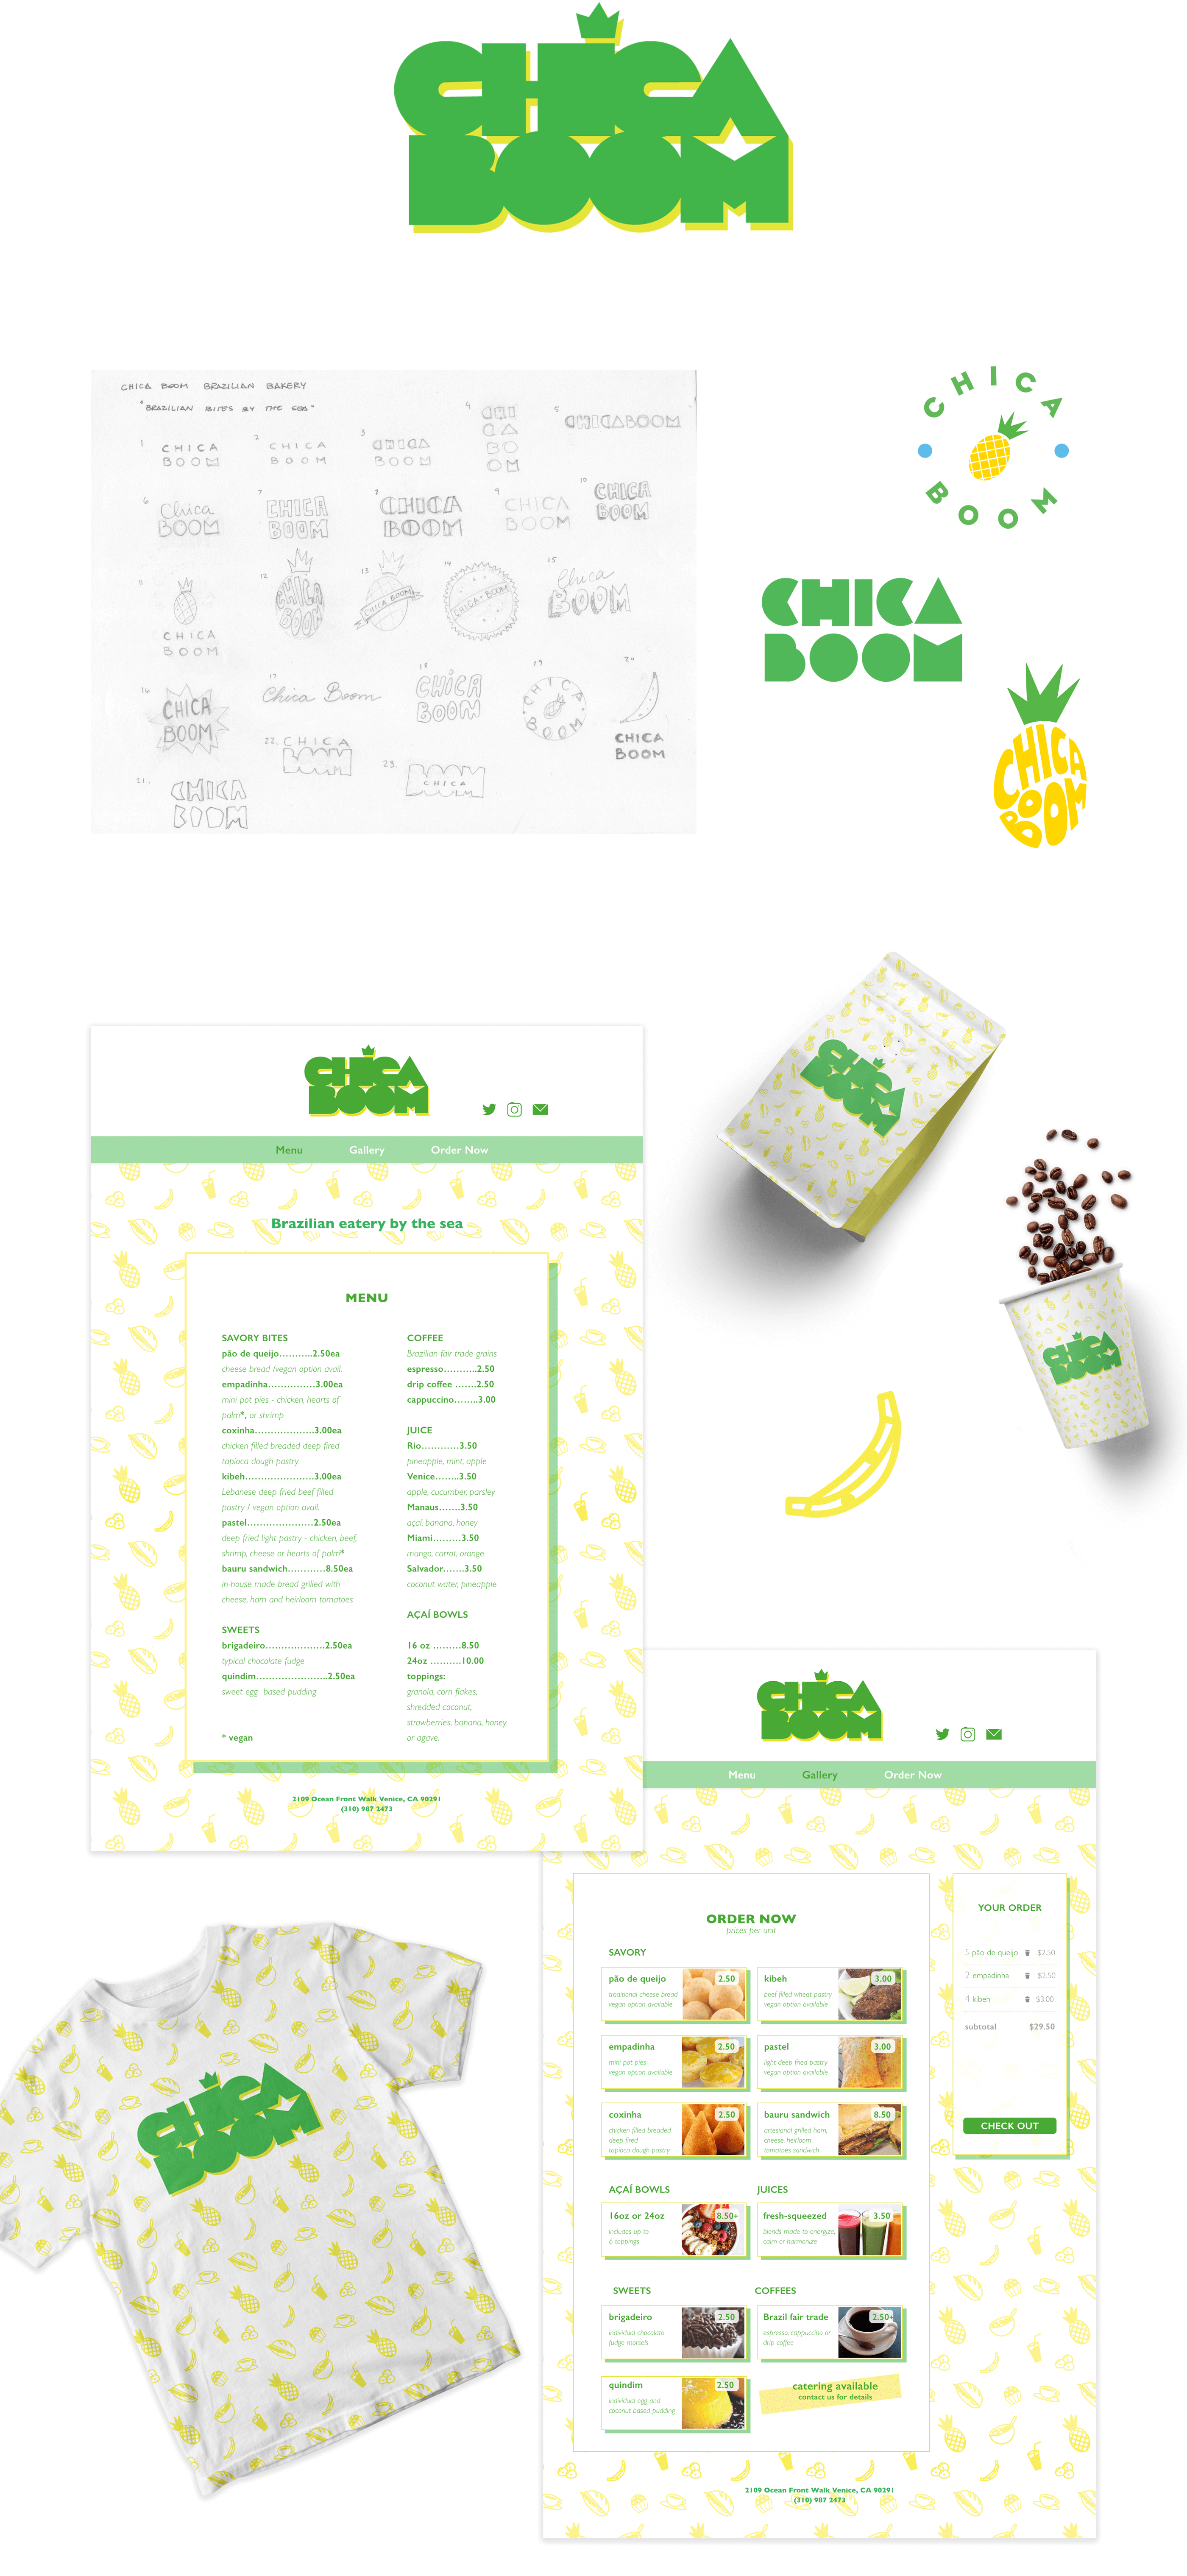 Chica Boom Brazilian restaturant with kistch appeal -  visual identity student project